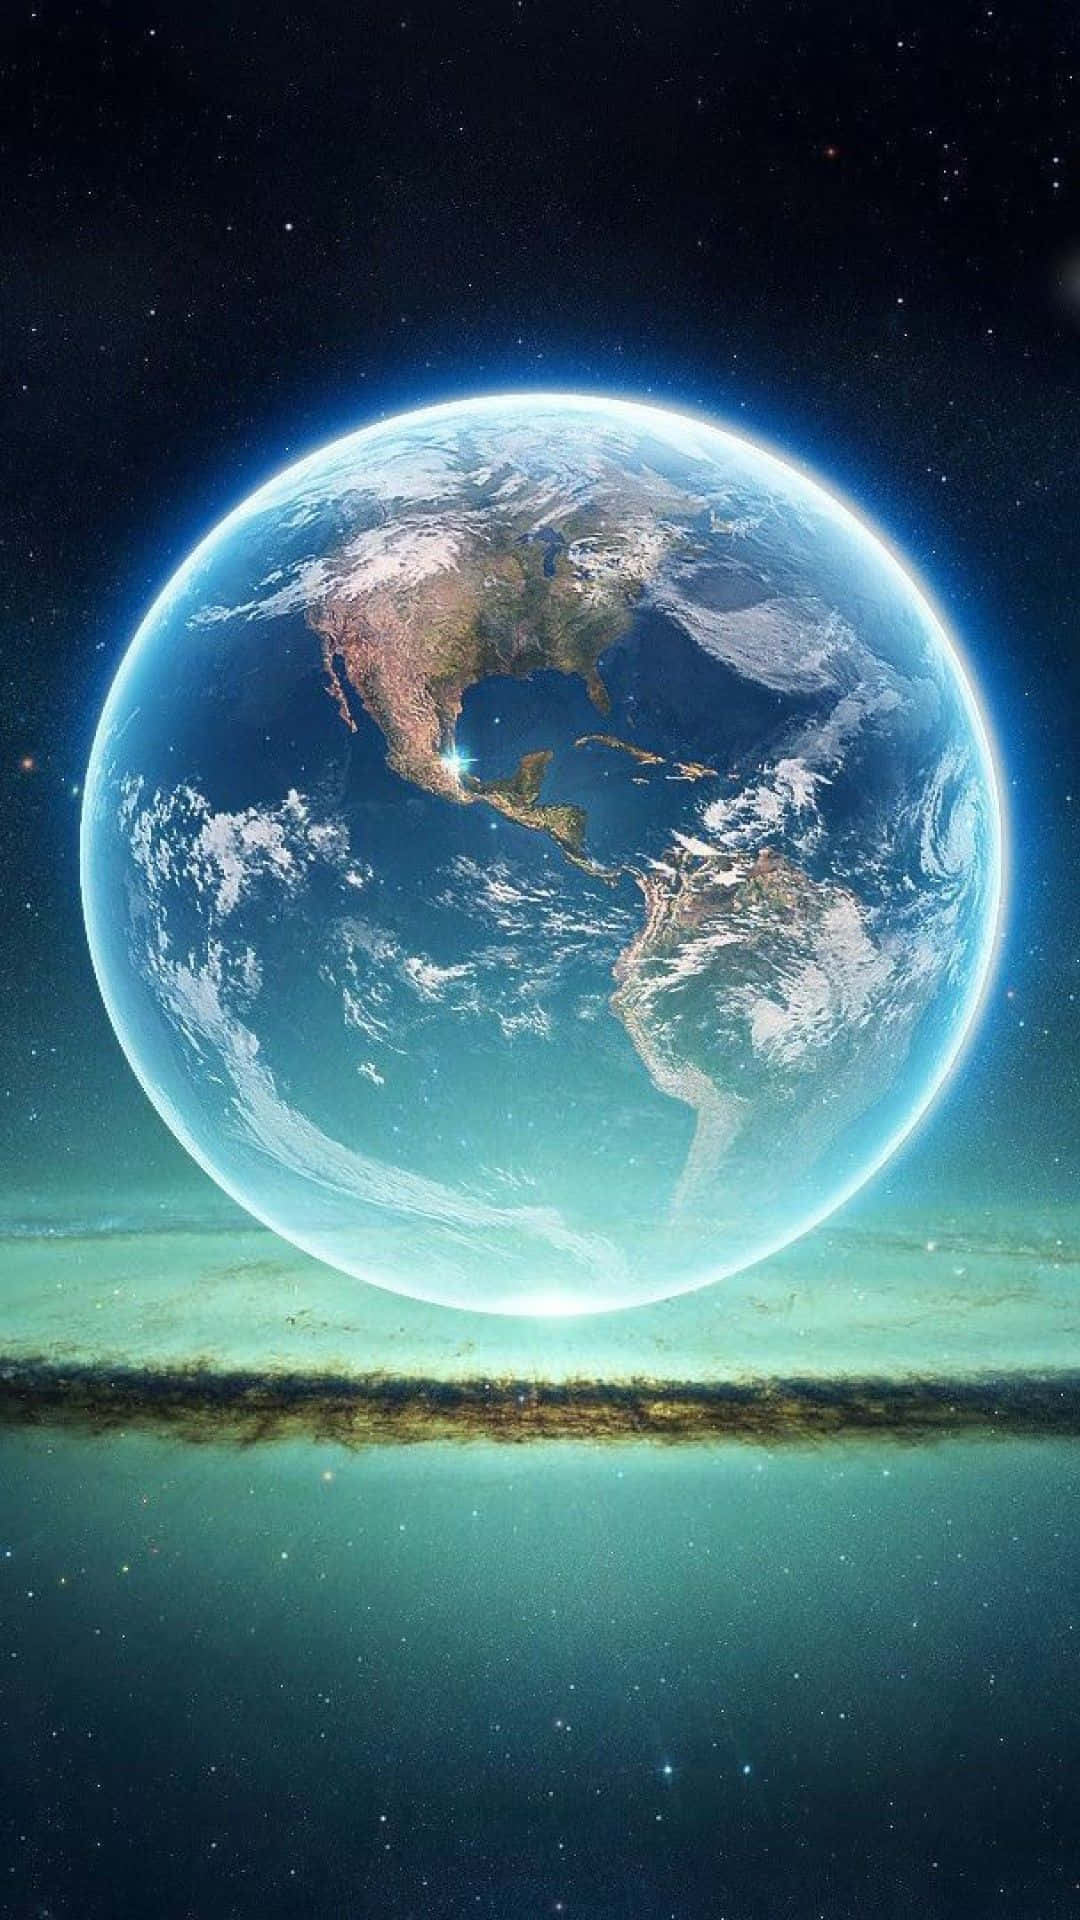 Iphone Surreal Earth In The Sky Wallpaper